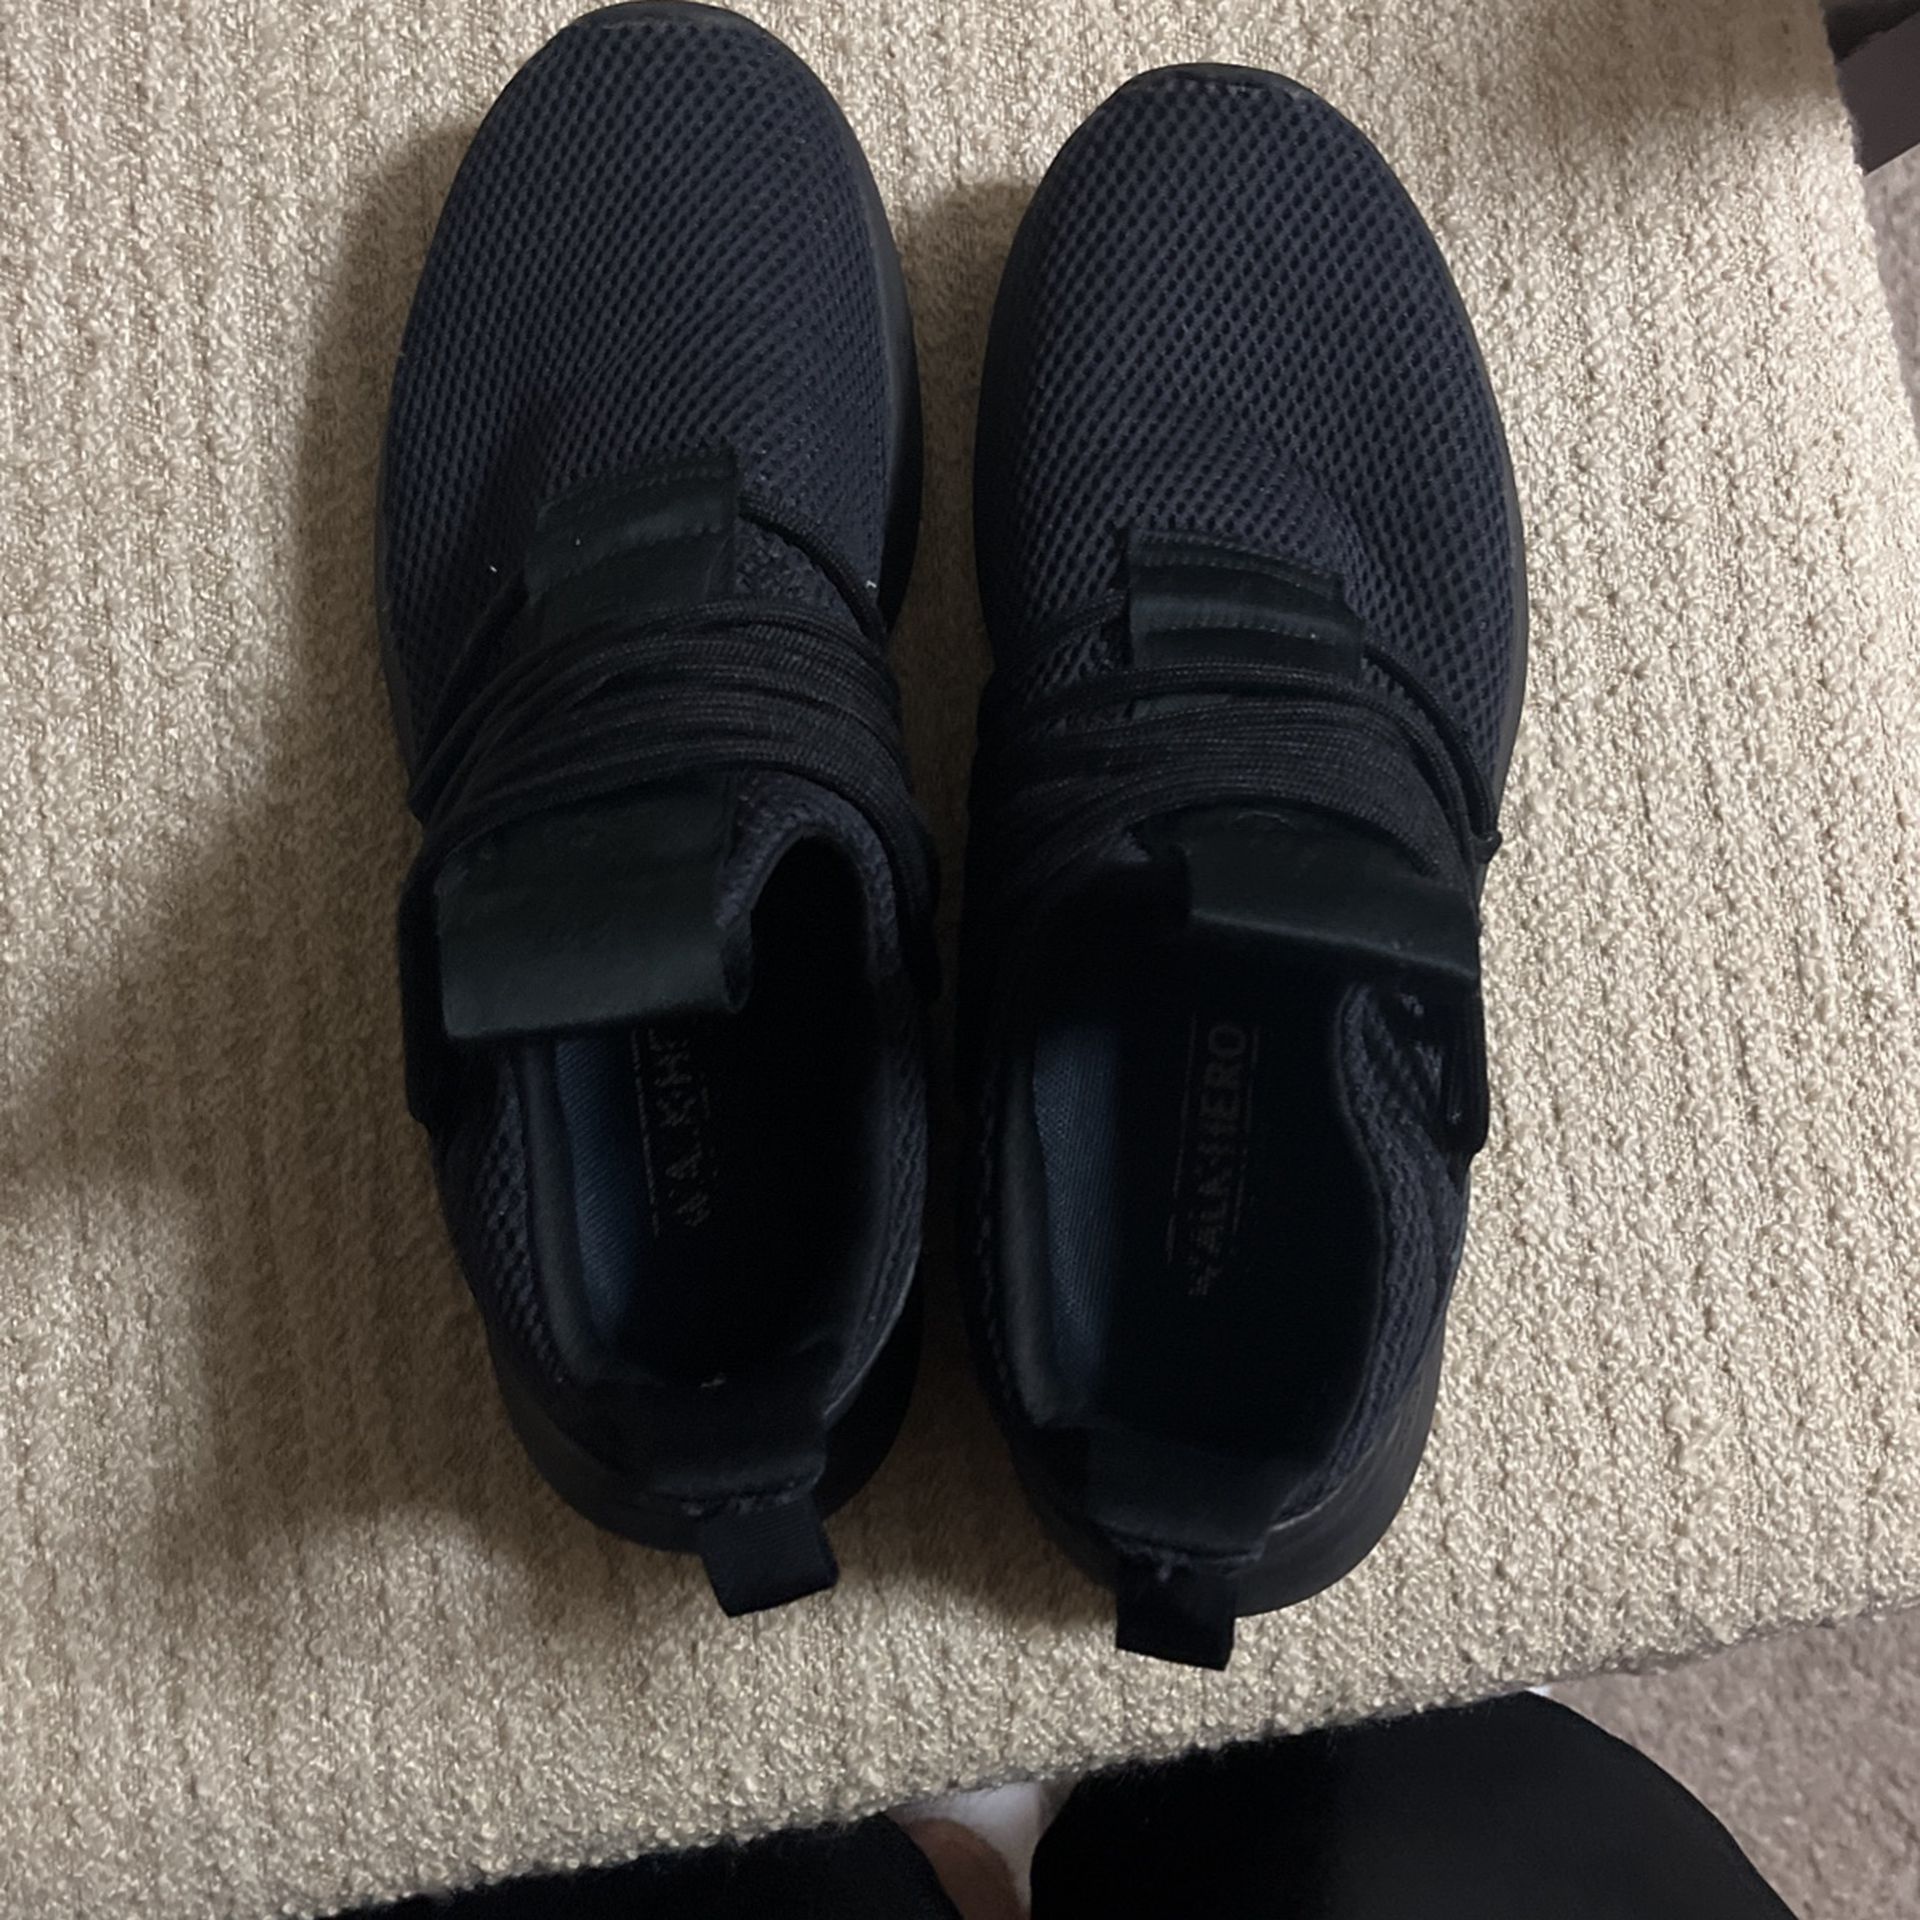 Adidas shoes - BLACK - Barely Worn